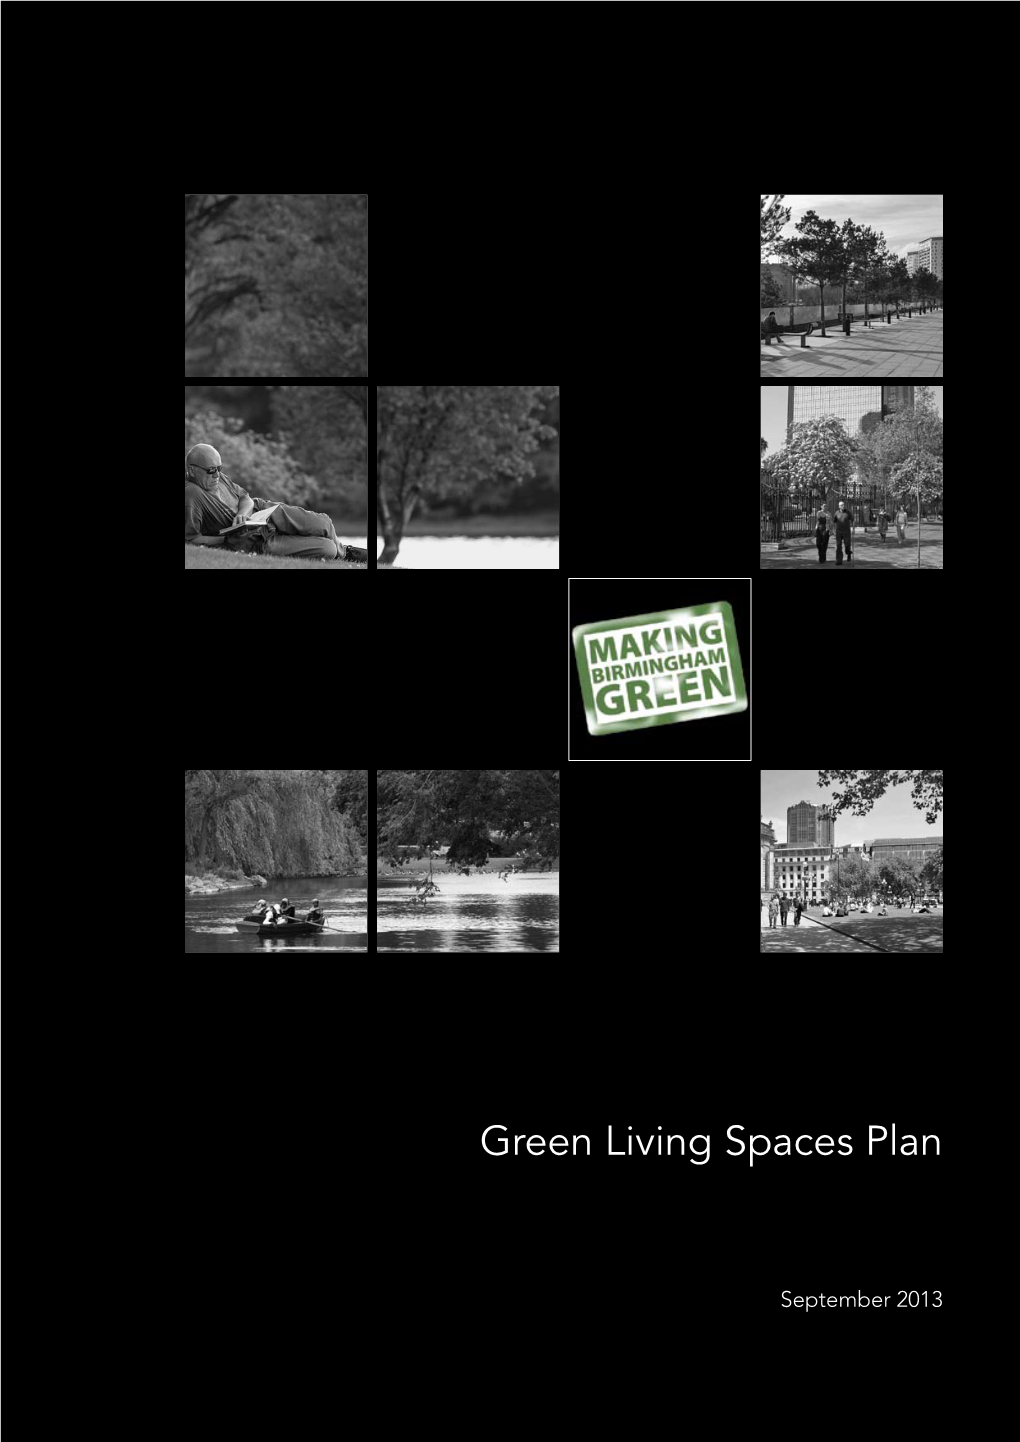 Green Living Spaces Plan